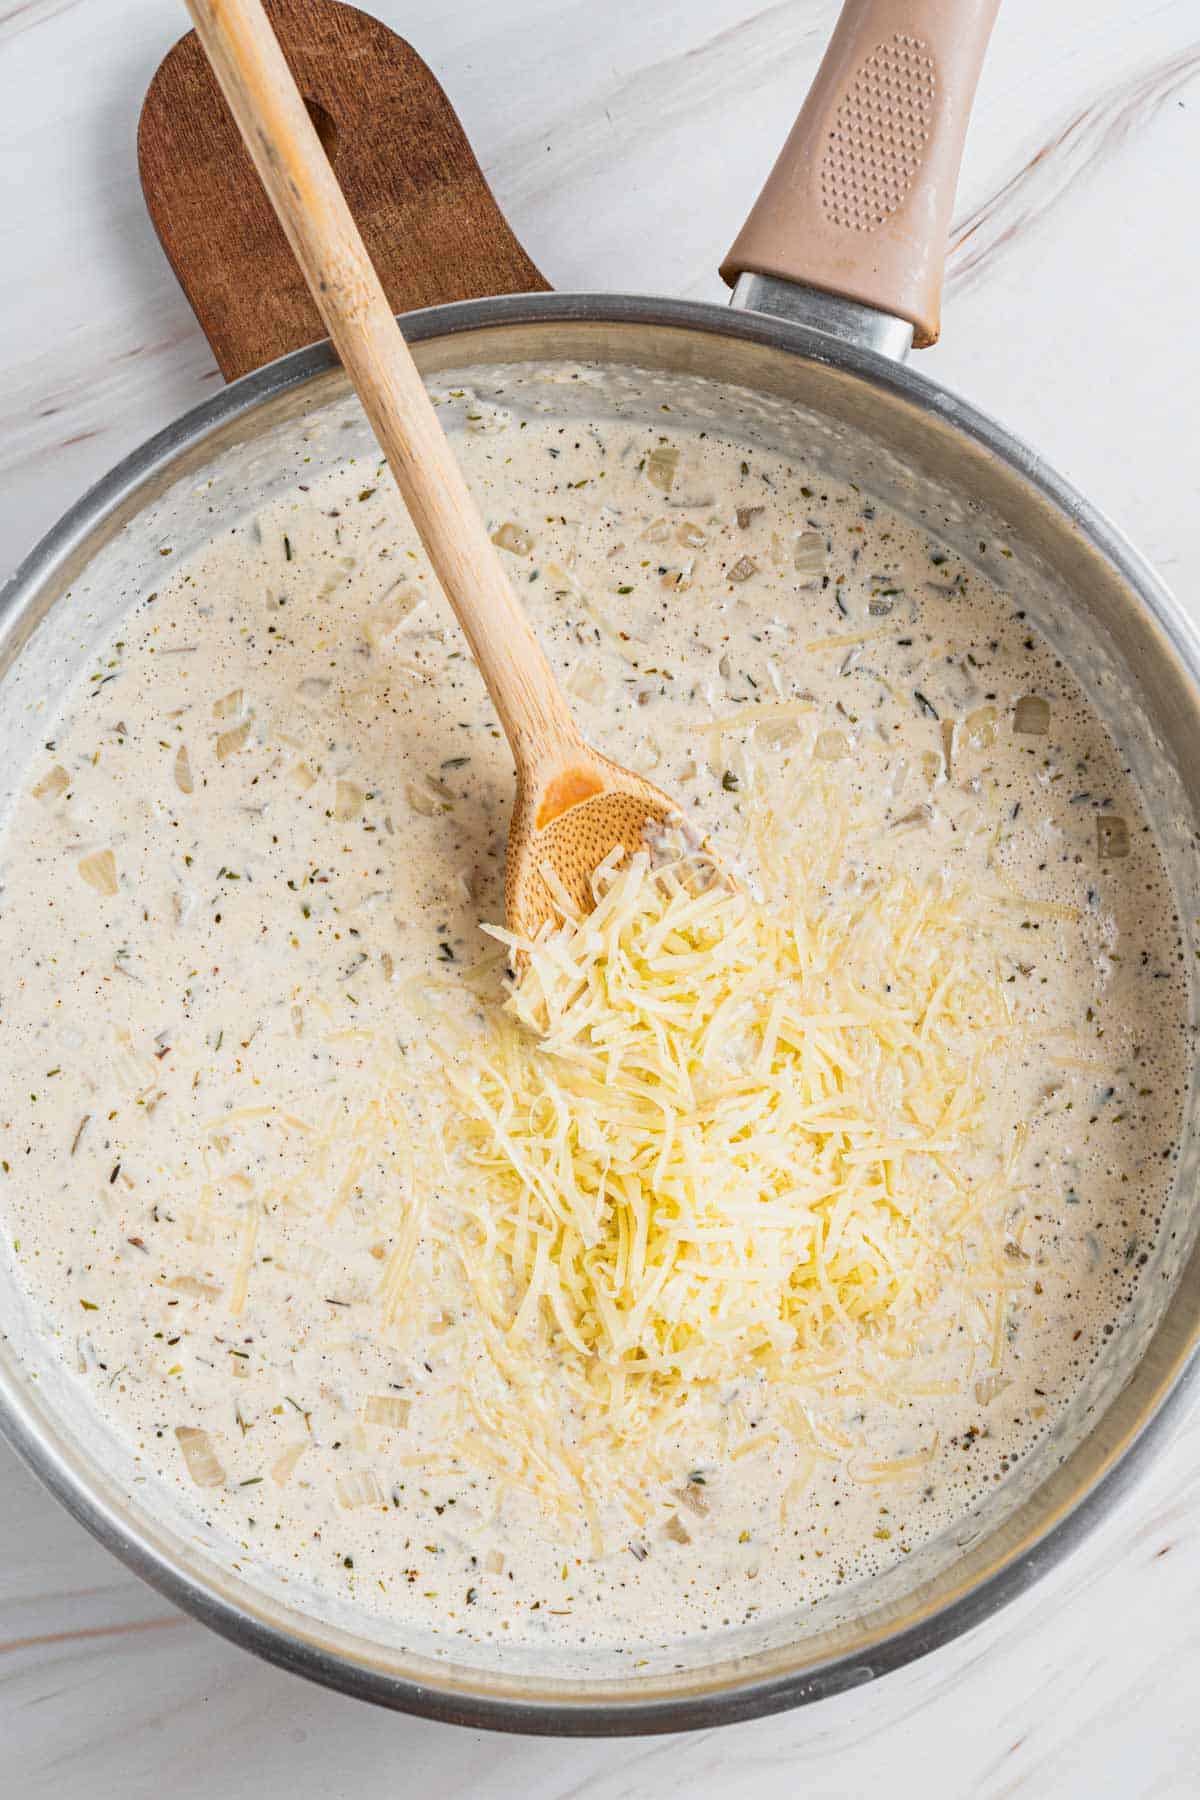 parmesan cheese mixed in white sauce.